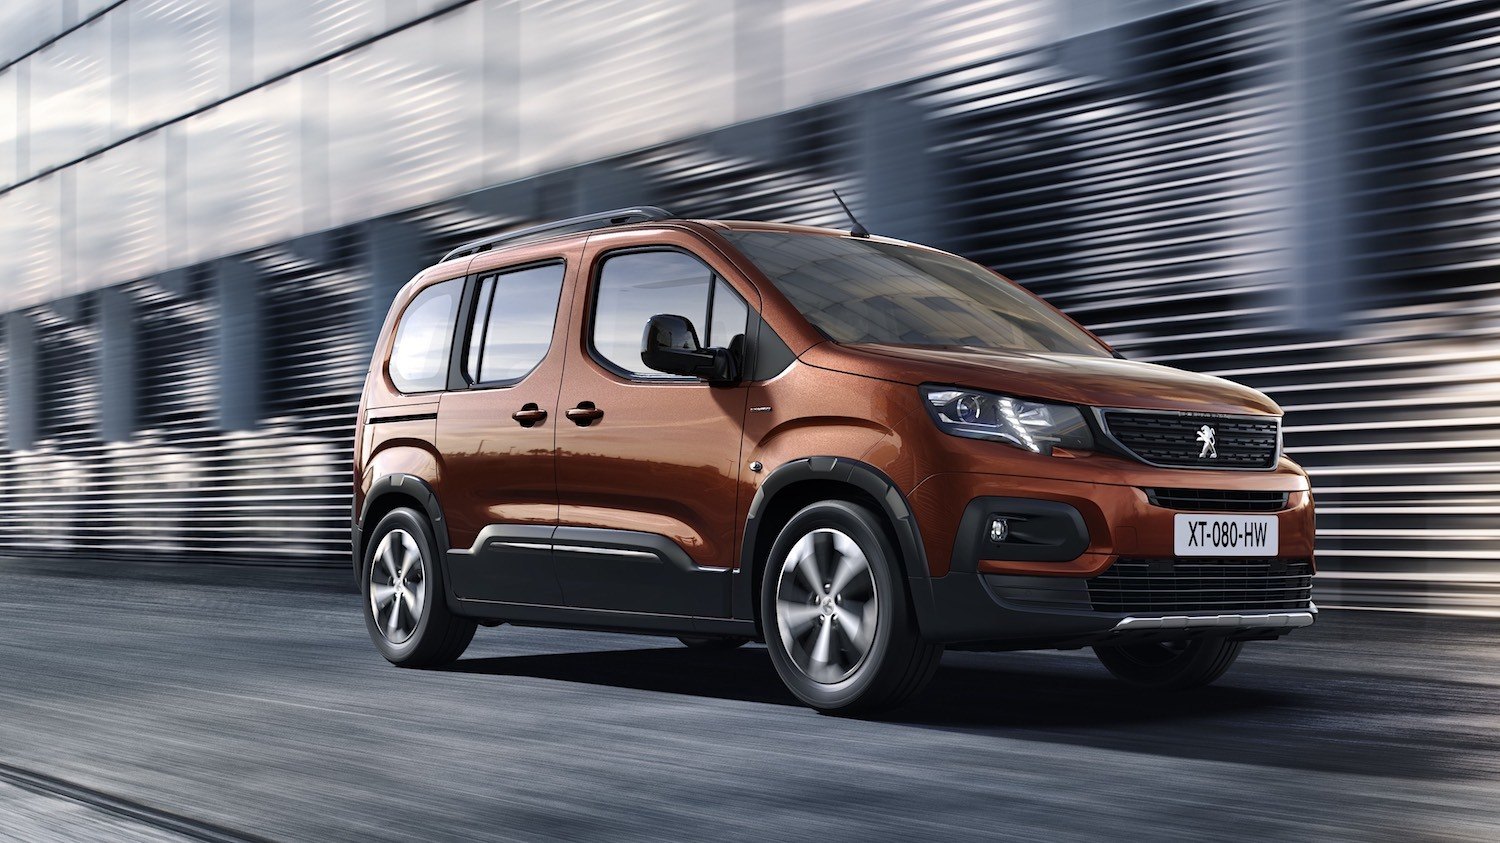 Tim Barnes-Clay reviews the Peugeot Rifter from the European Launch 1